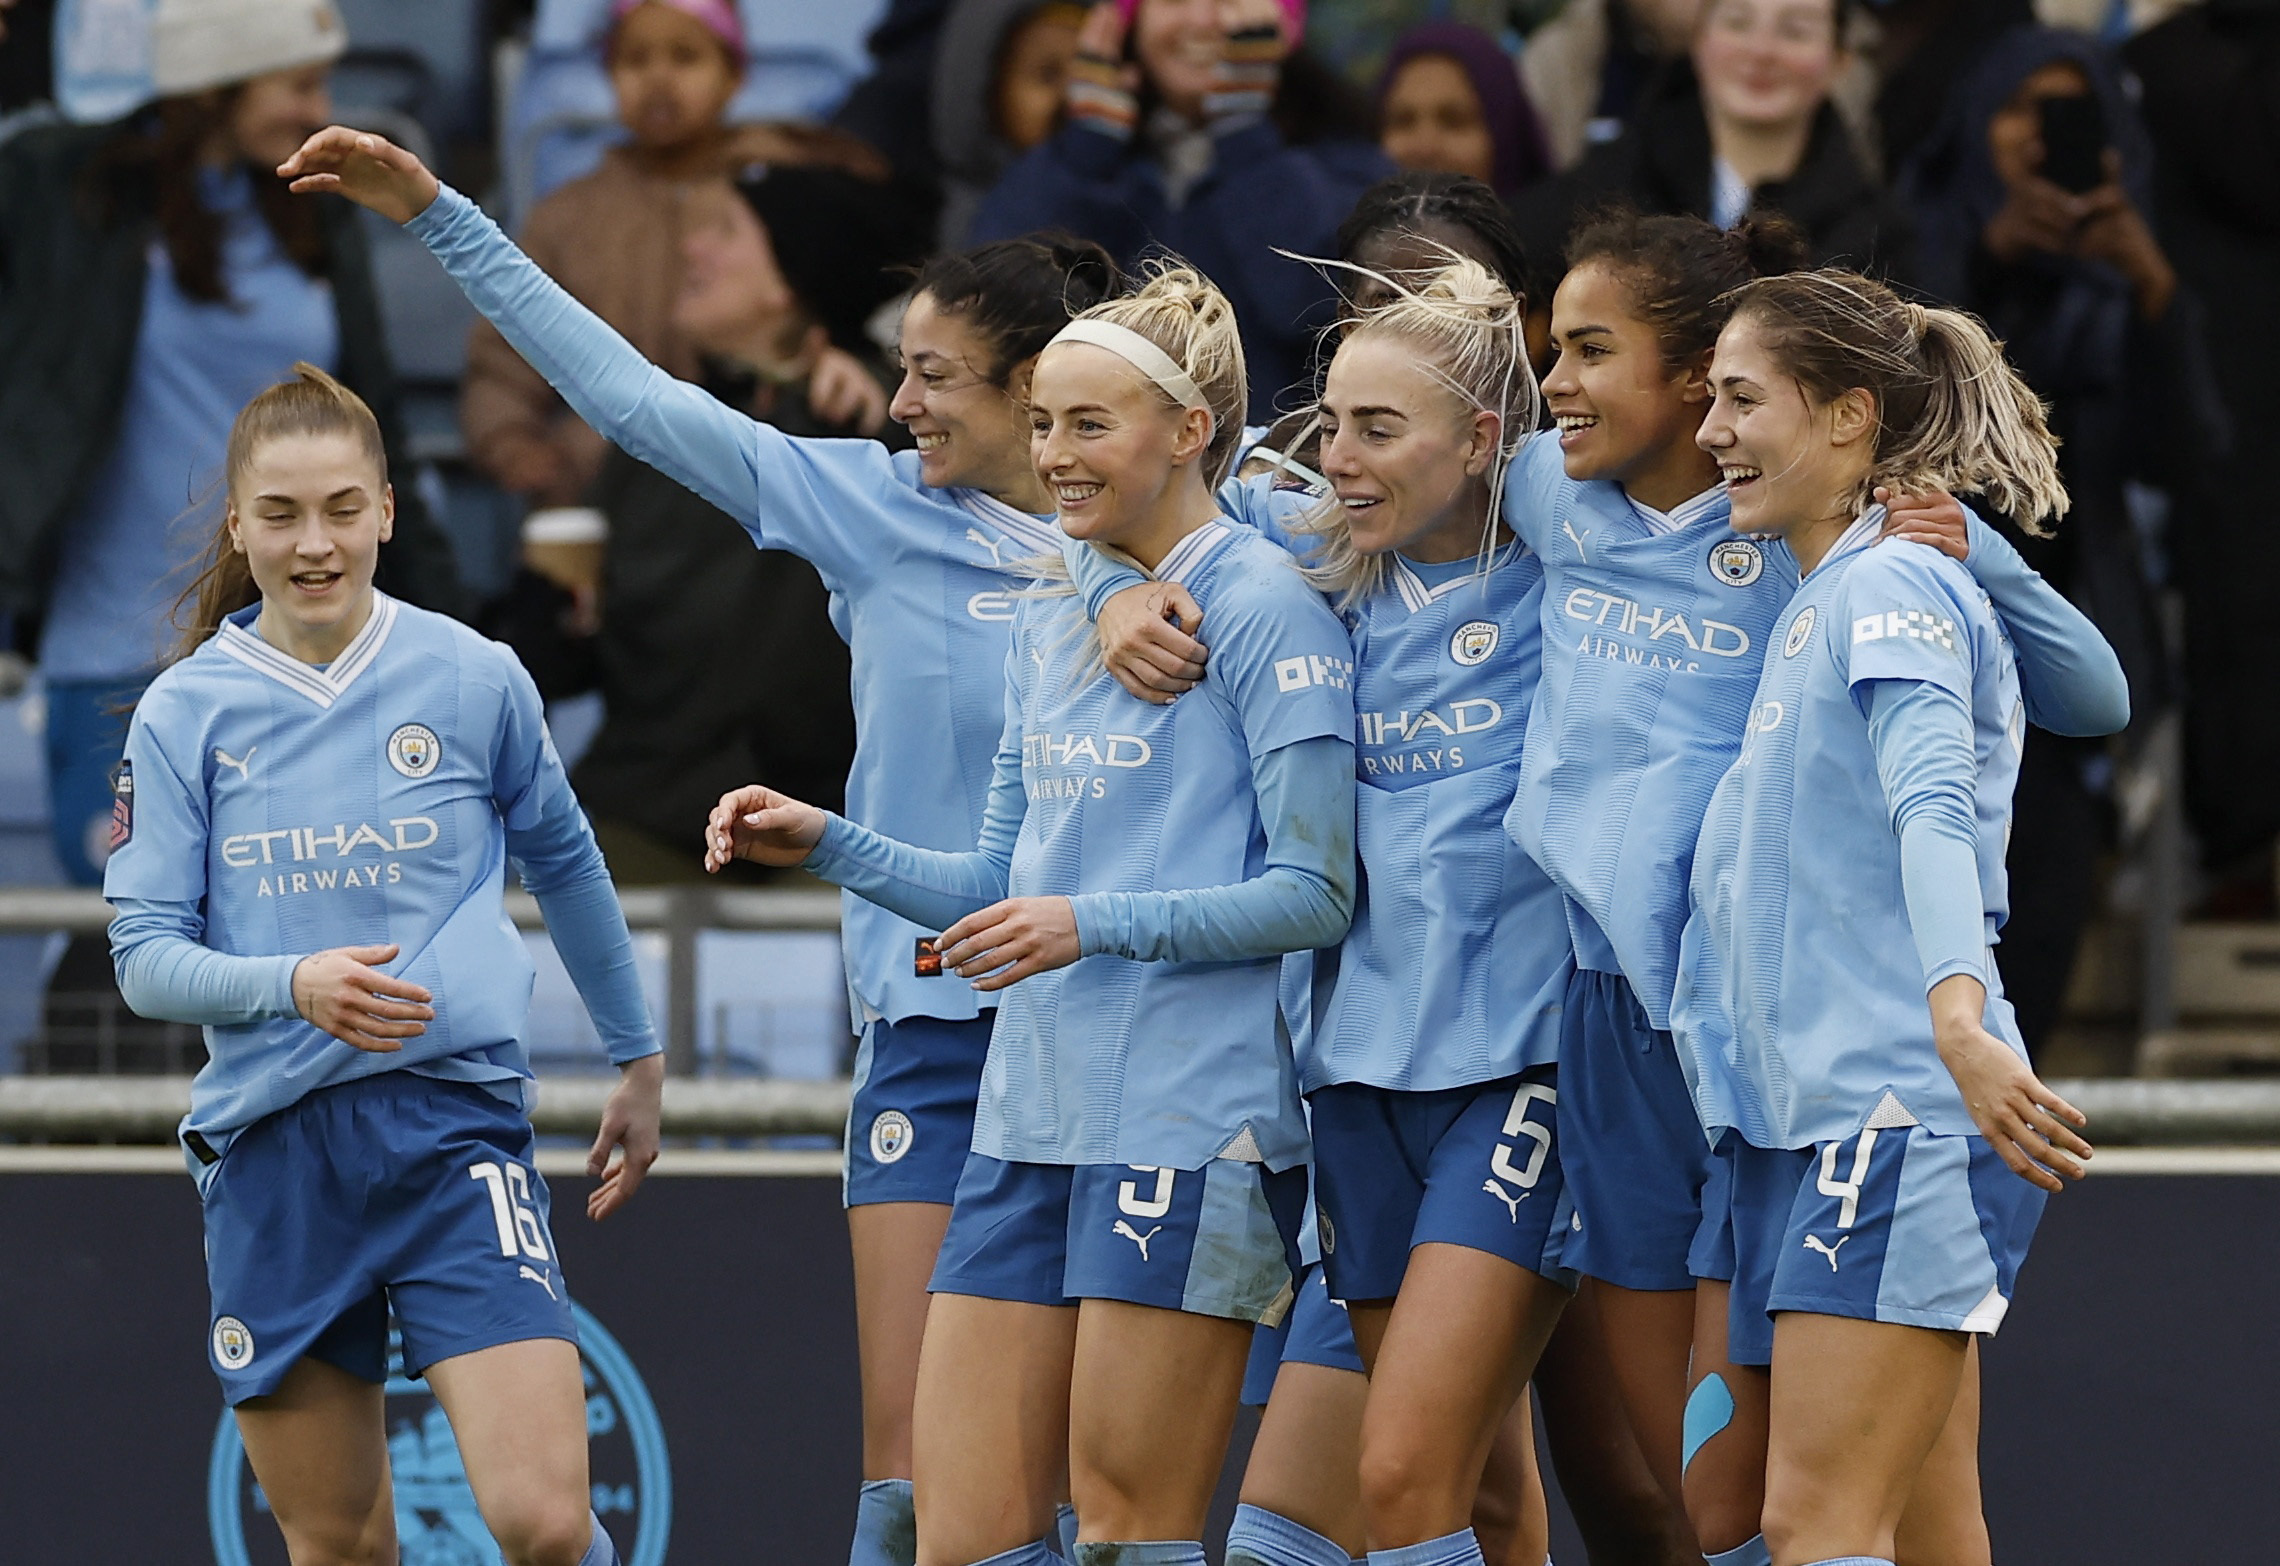 Sports Direct Women's Premiership sees 66% increase in crowds